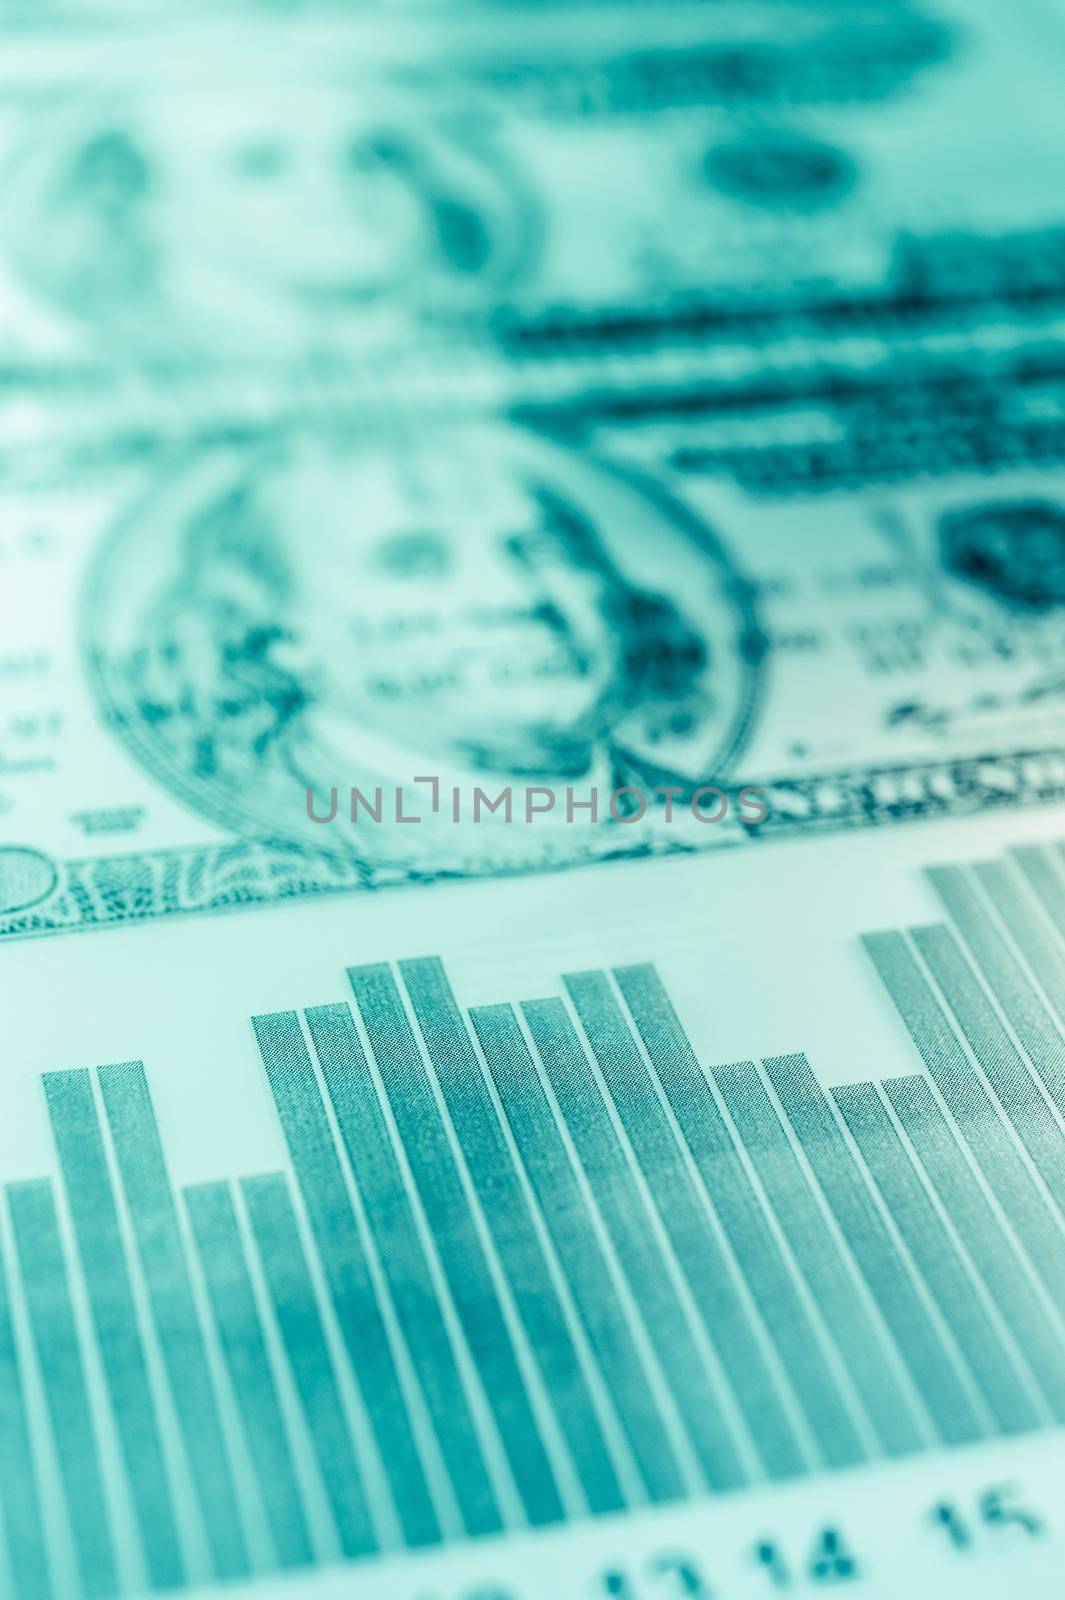 Double exposure Stock market display or forex trading graph and candlestick chart on dollar banknote by bashta